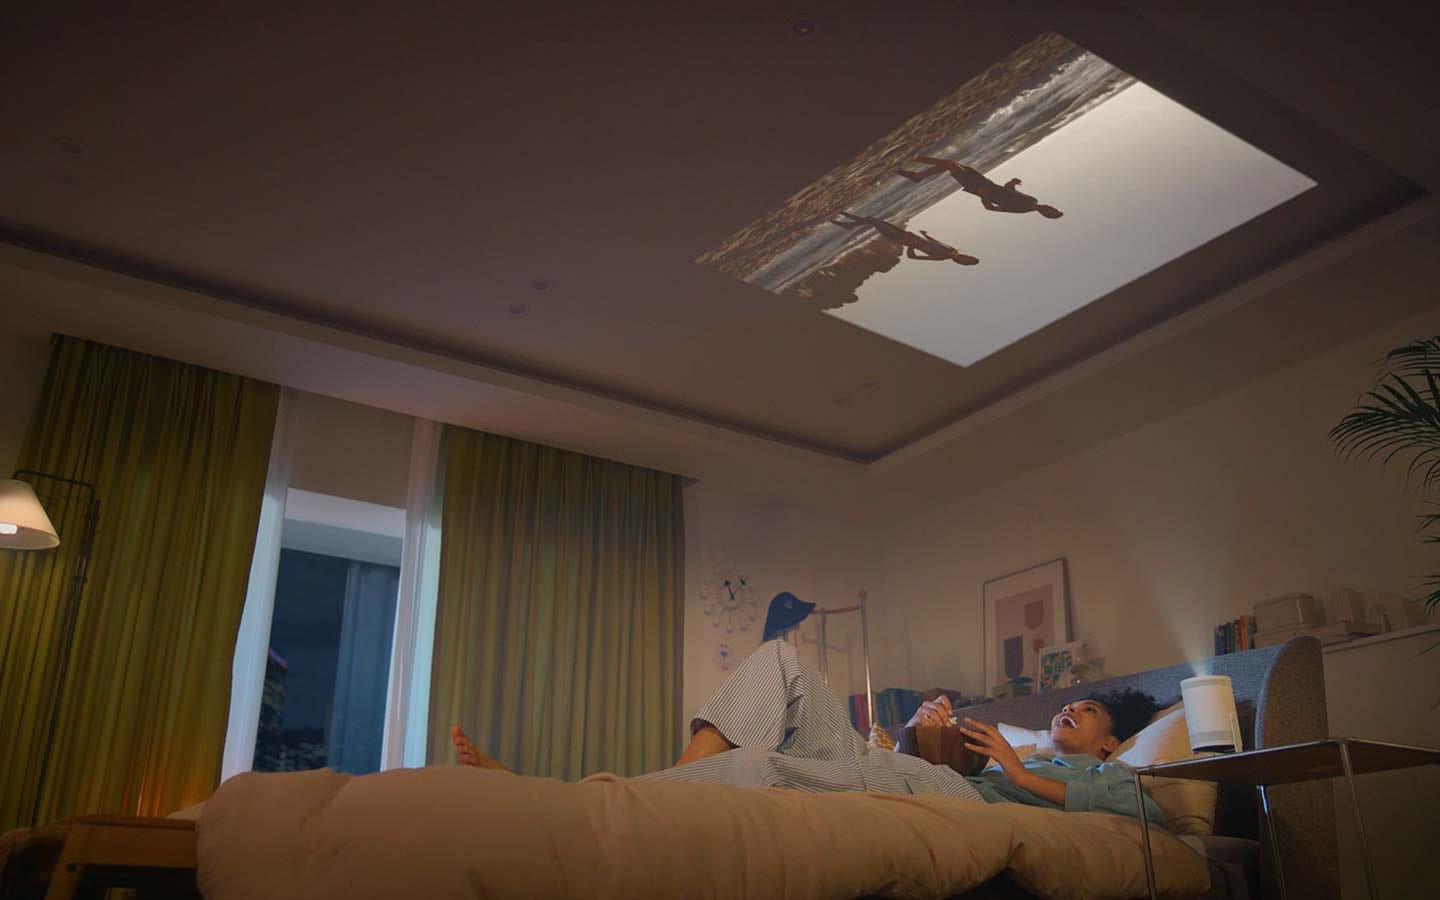 A woman watching a movie projected on the wall from her bed and tilting the screen to the ceiling